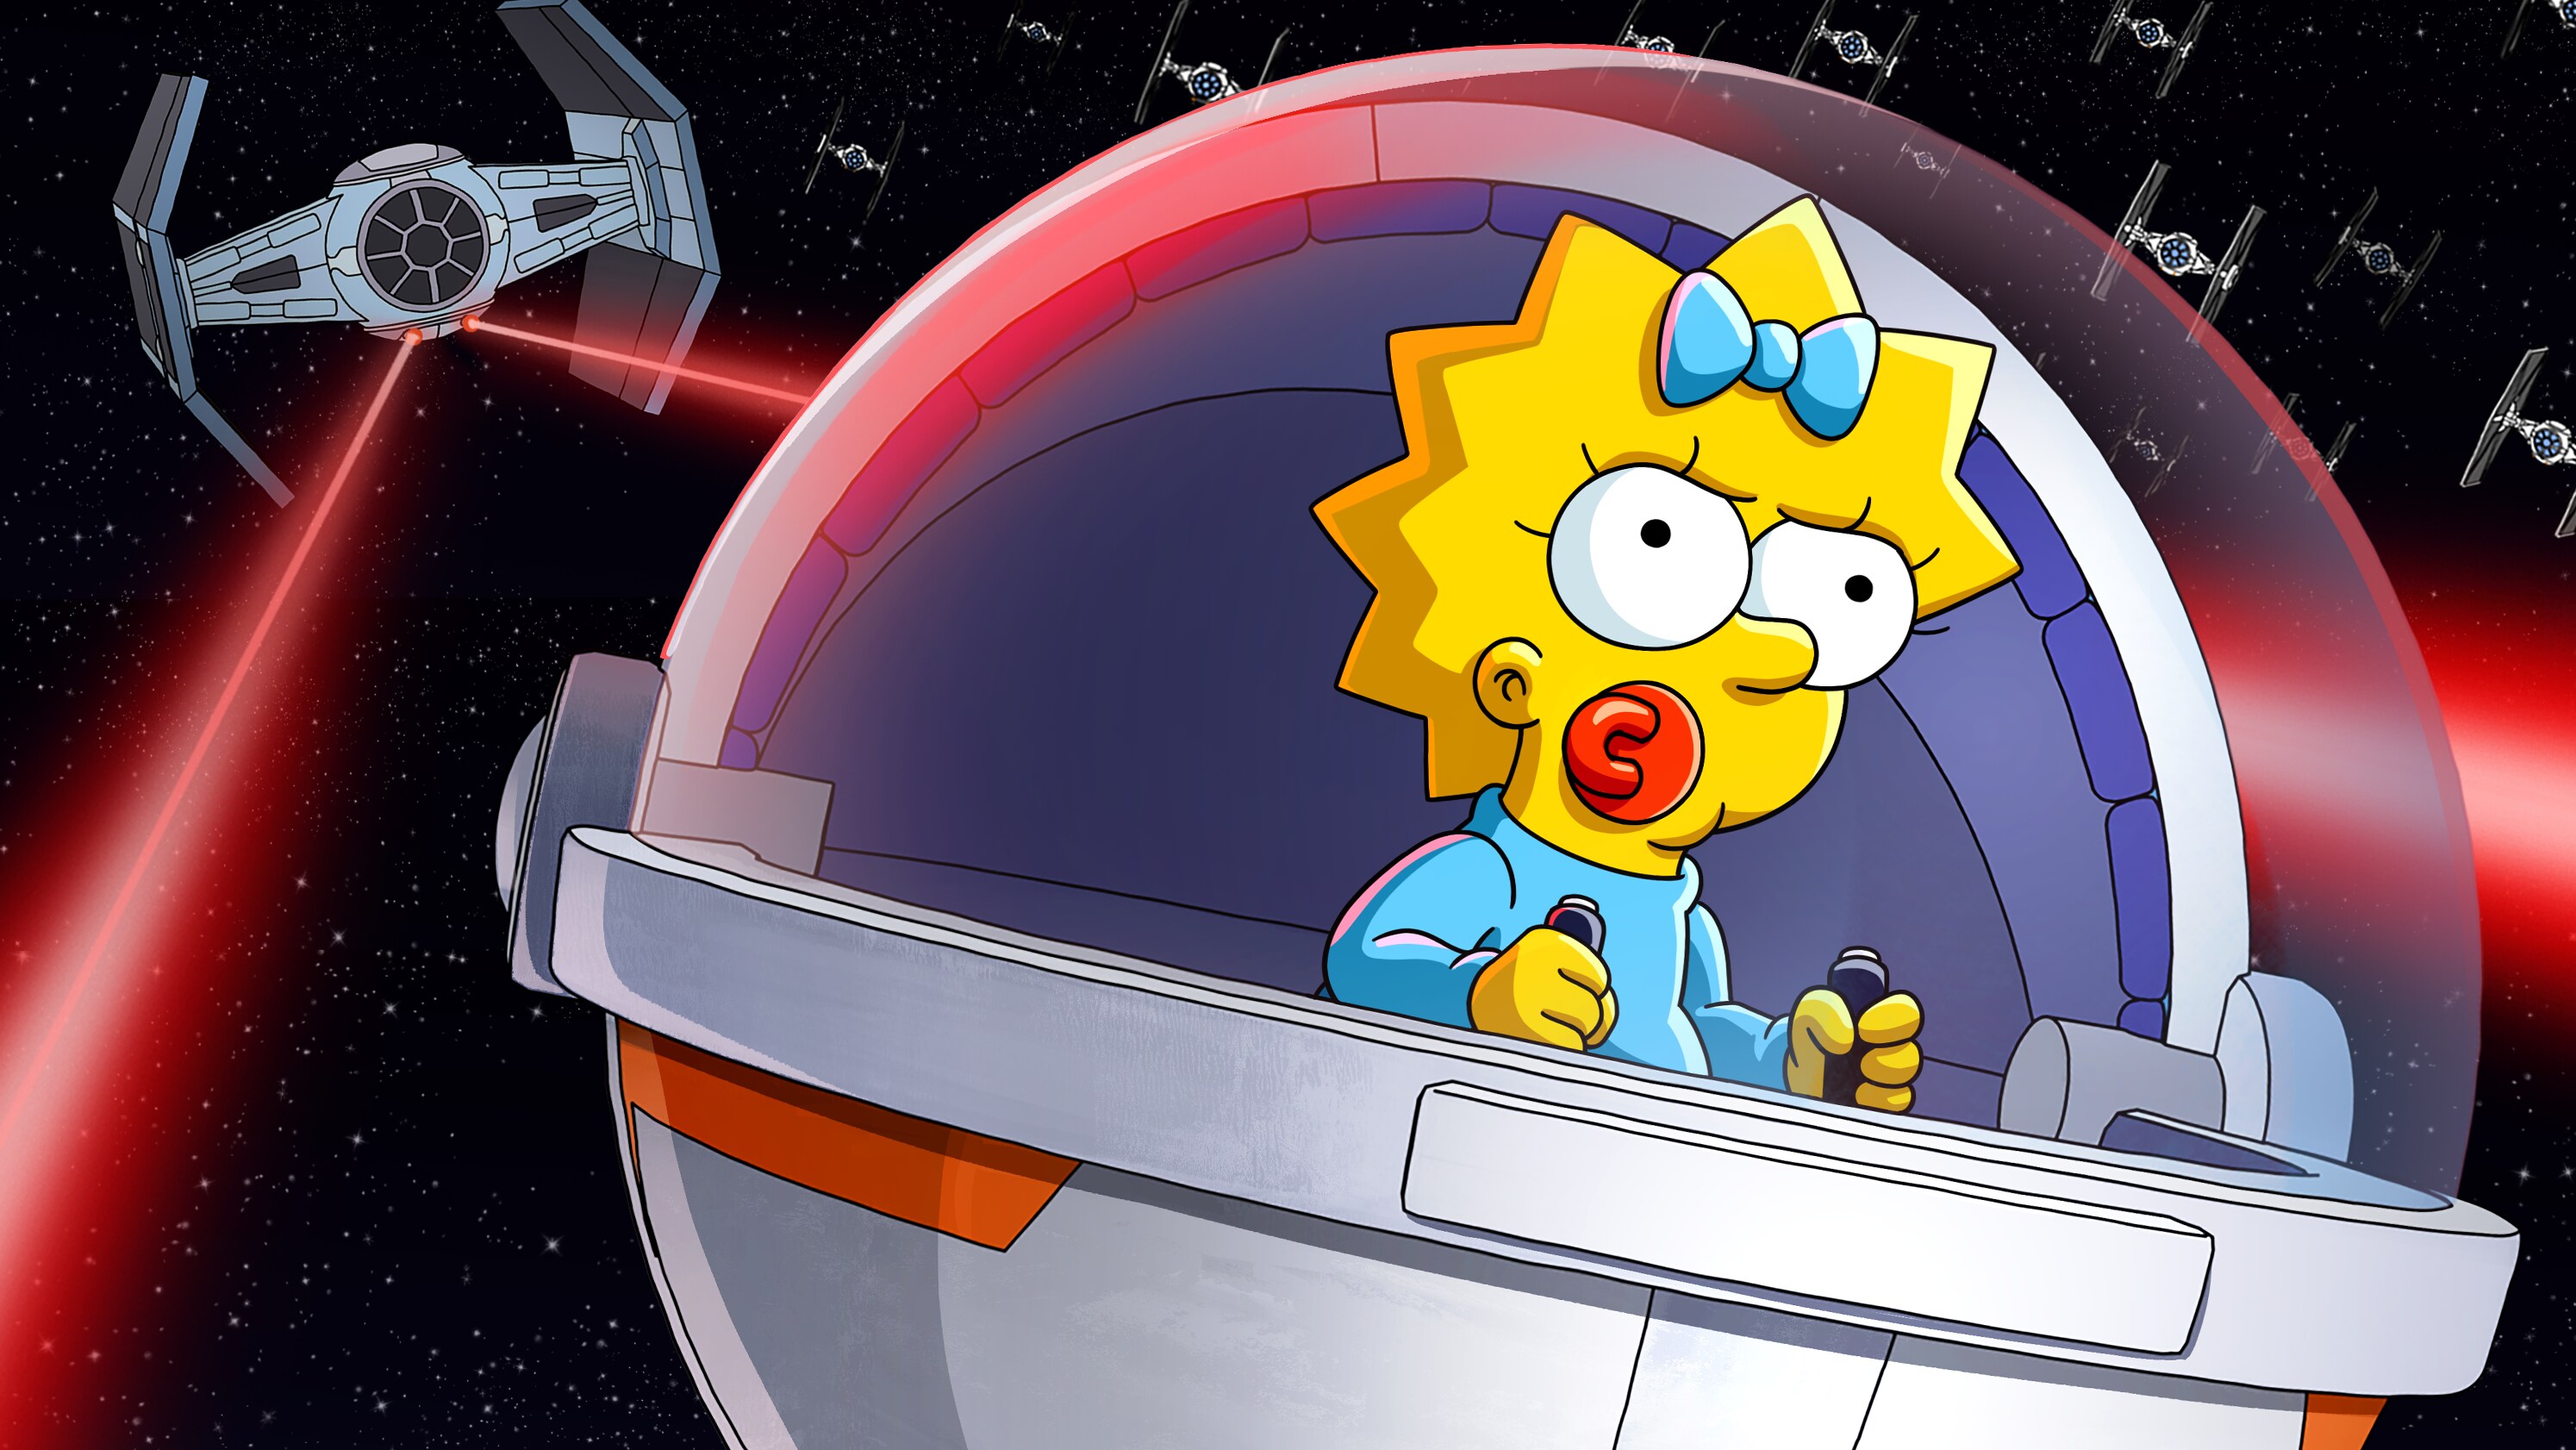 TRAVEL TO A GALAXY FAR, FAR AWAY IN THE NEW SIMPSONS SHORT “MAGGIE SIMPSON IN ‘ROGUE NOT QUITE ONE’” STREAMING MAY 